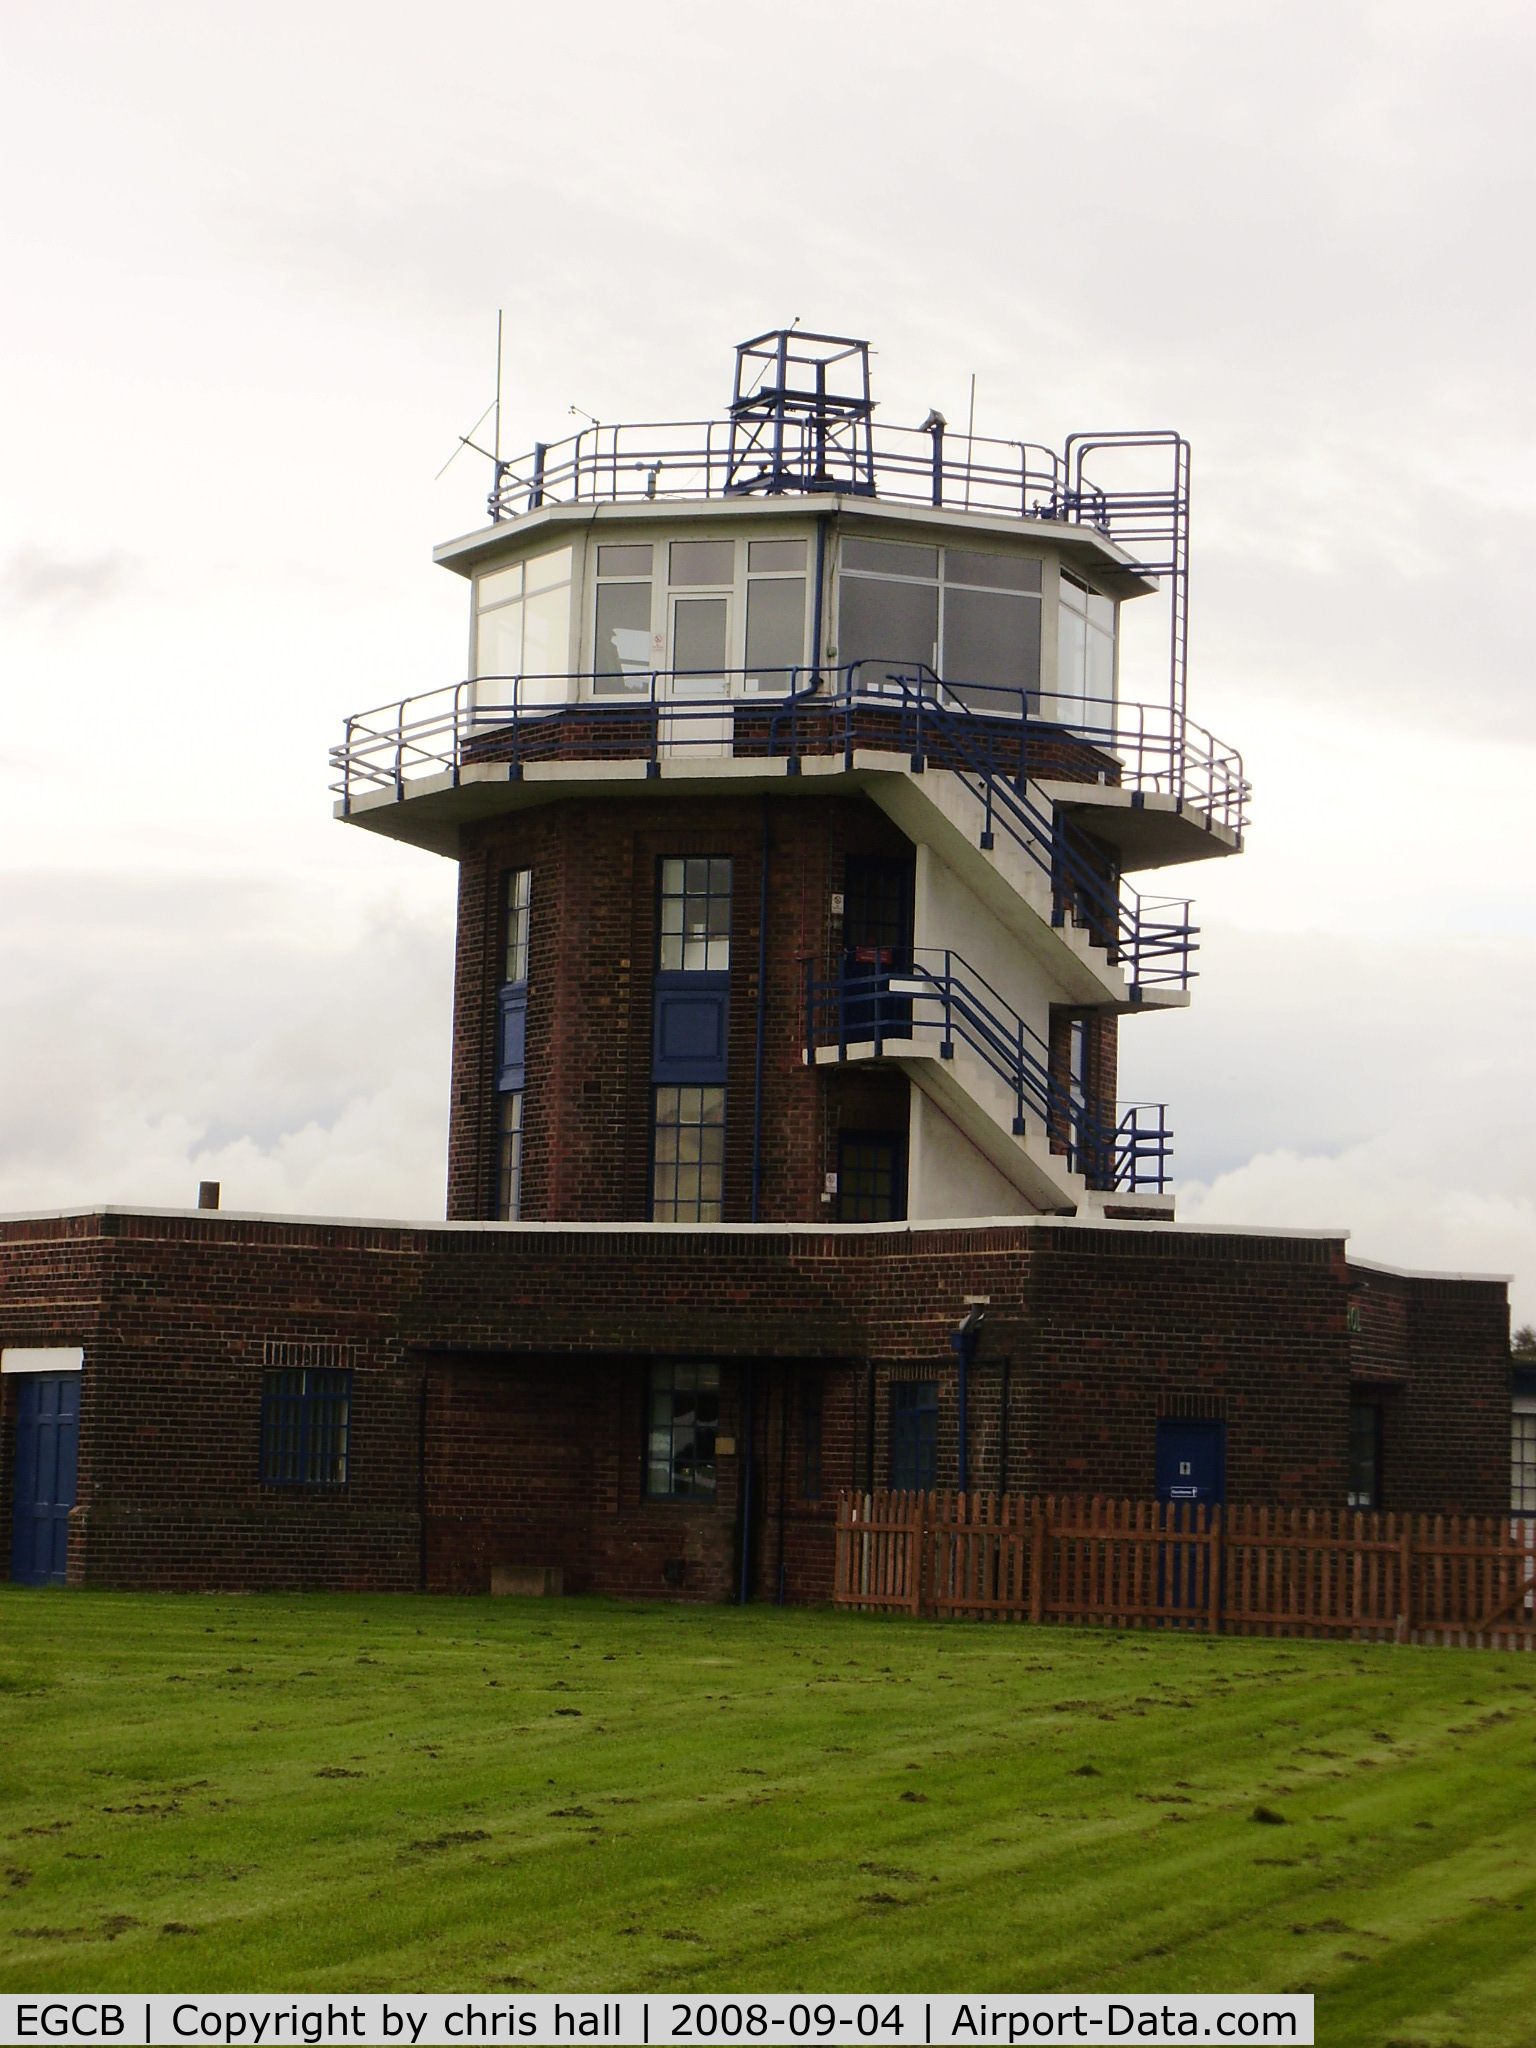 City Airport Manchester, Manchester, England United Kingdom (EGCB) - Barton's control tower which the oldest working control tower in the country.